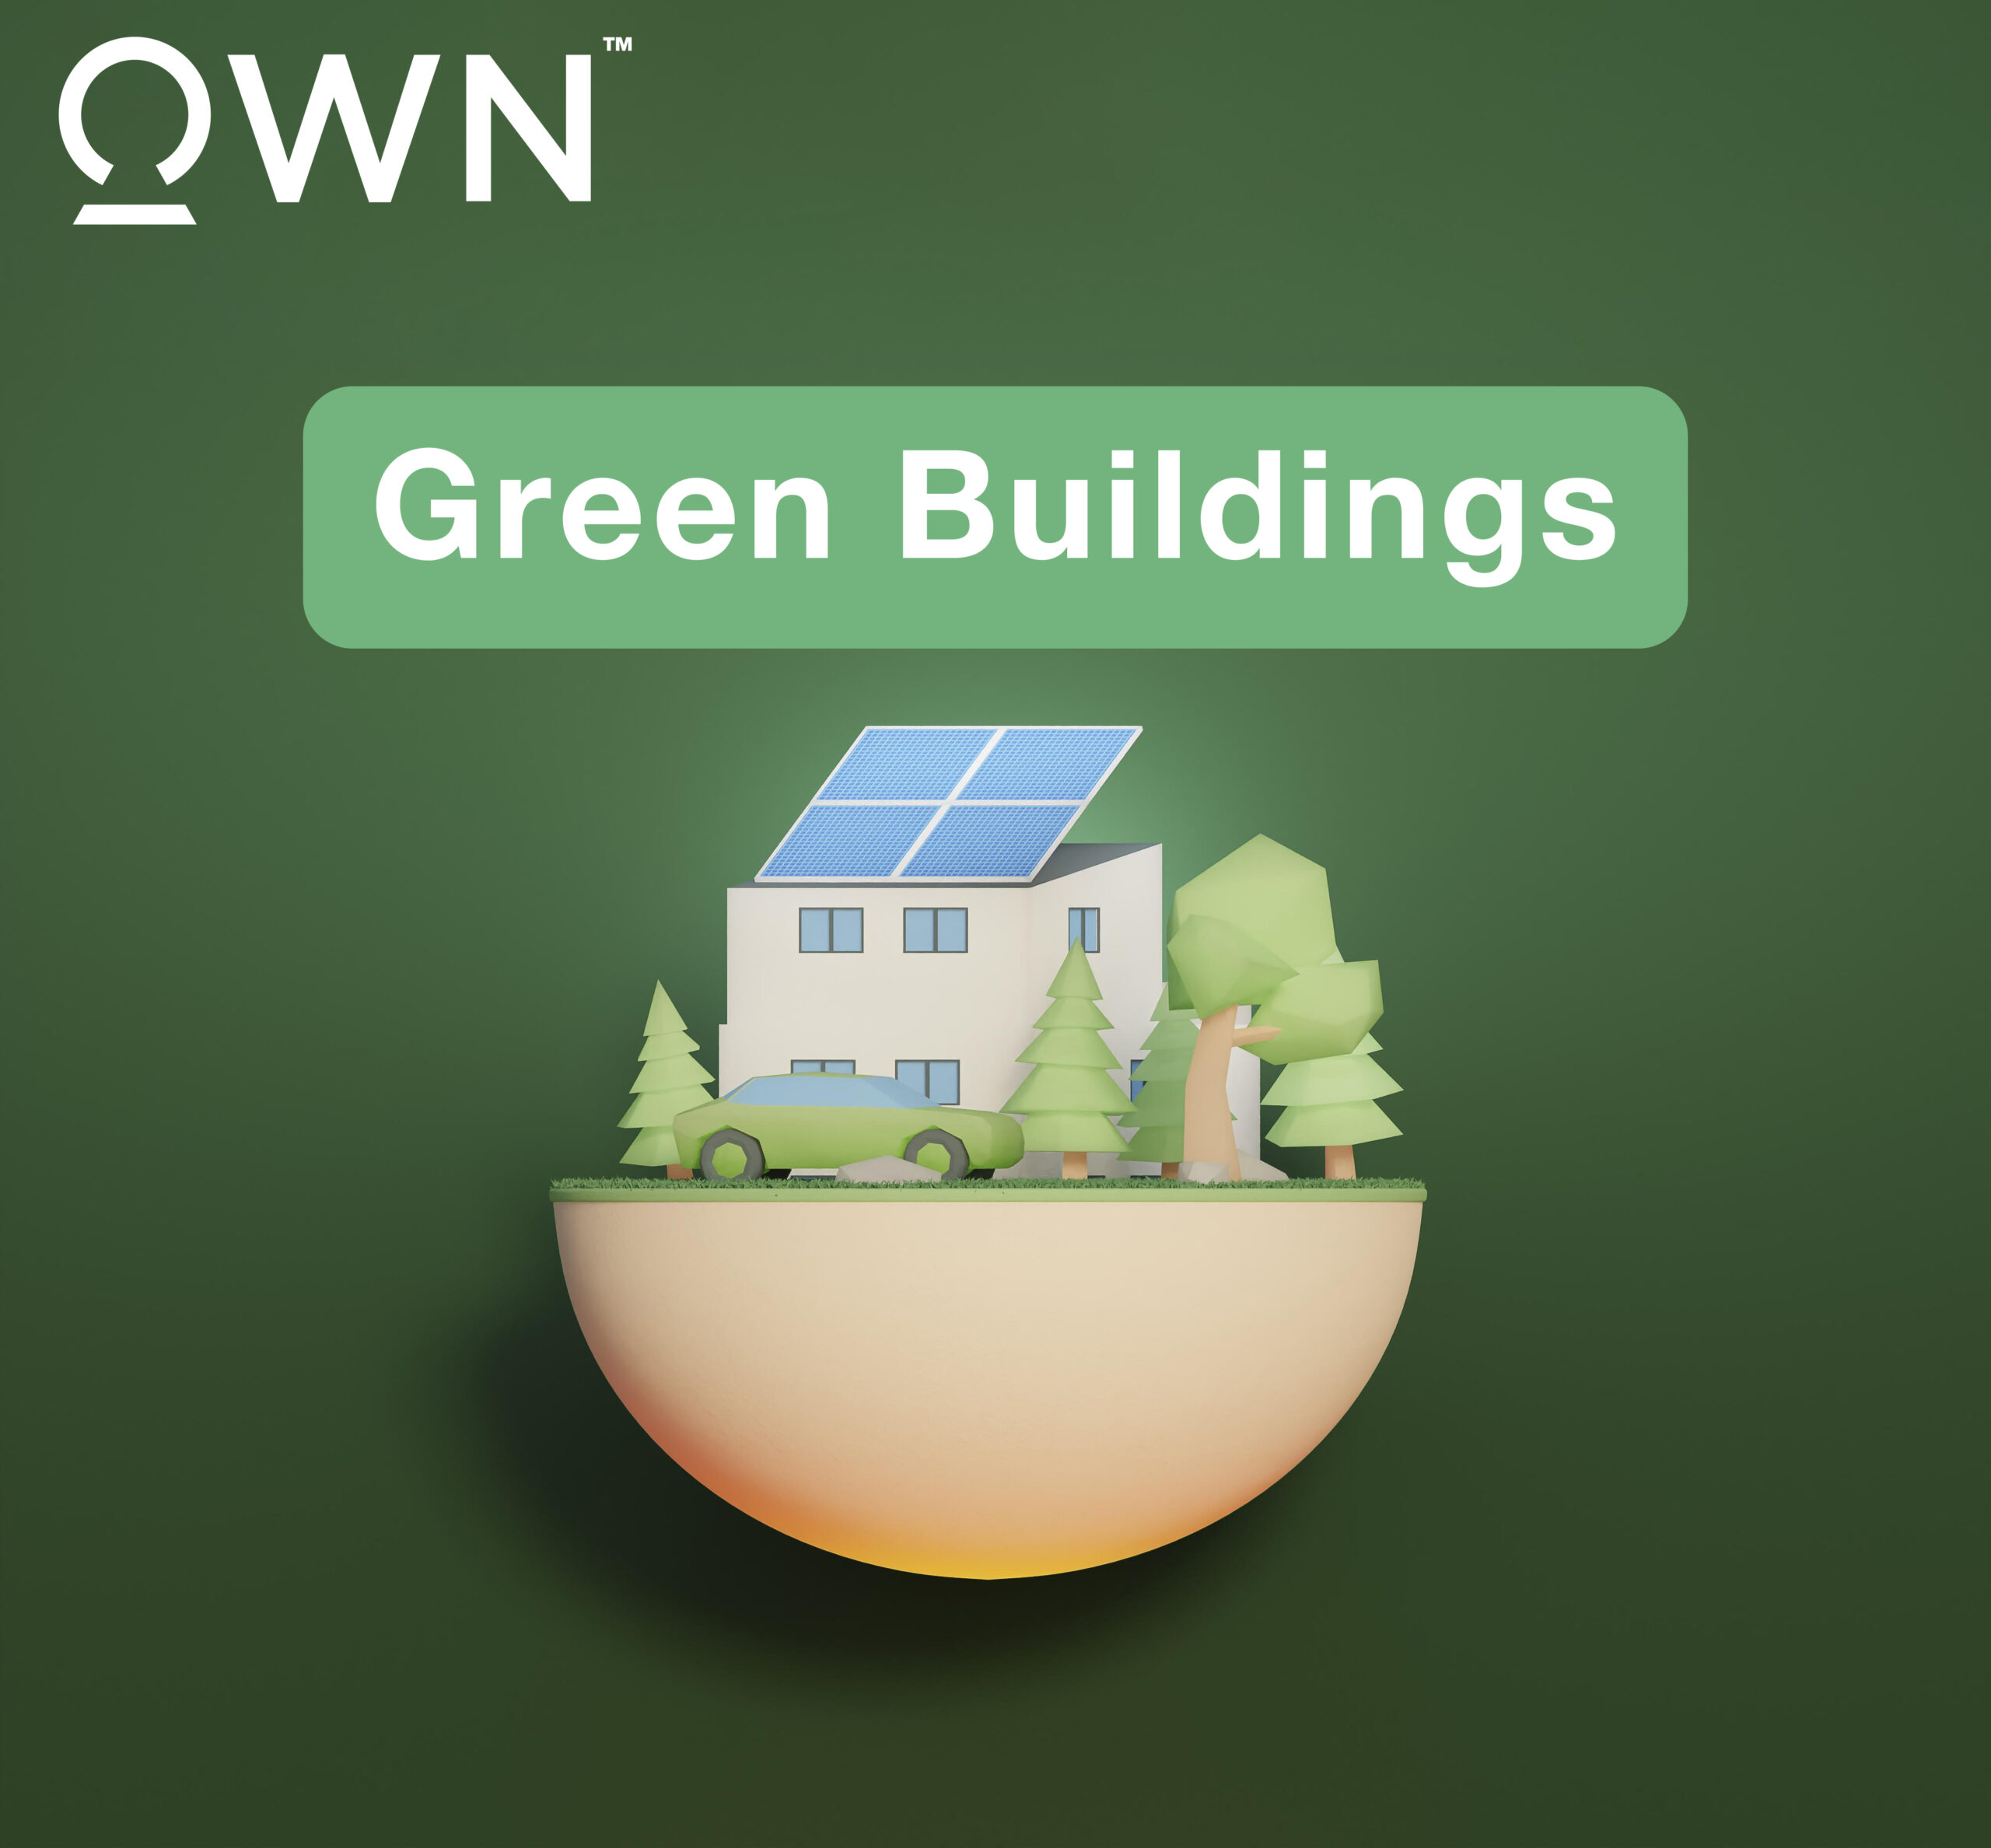 Green Buildings: Sustainable Construction